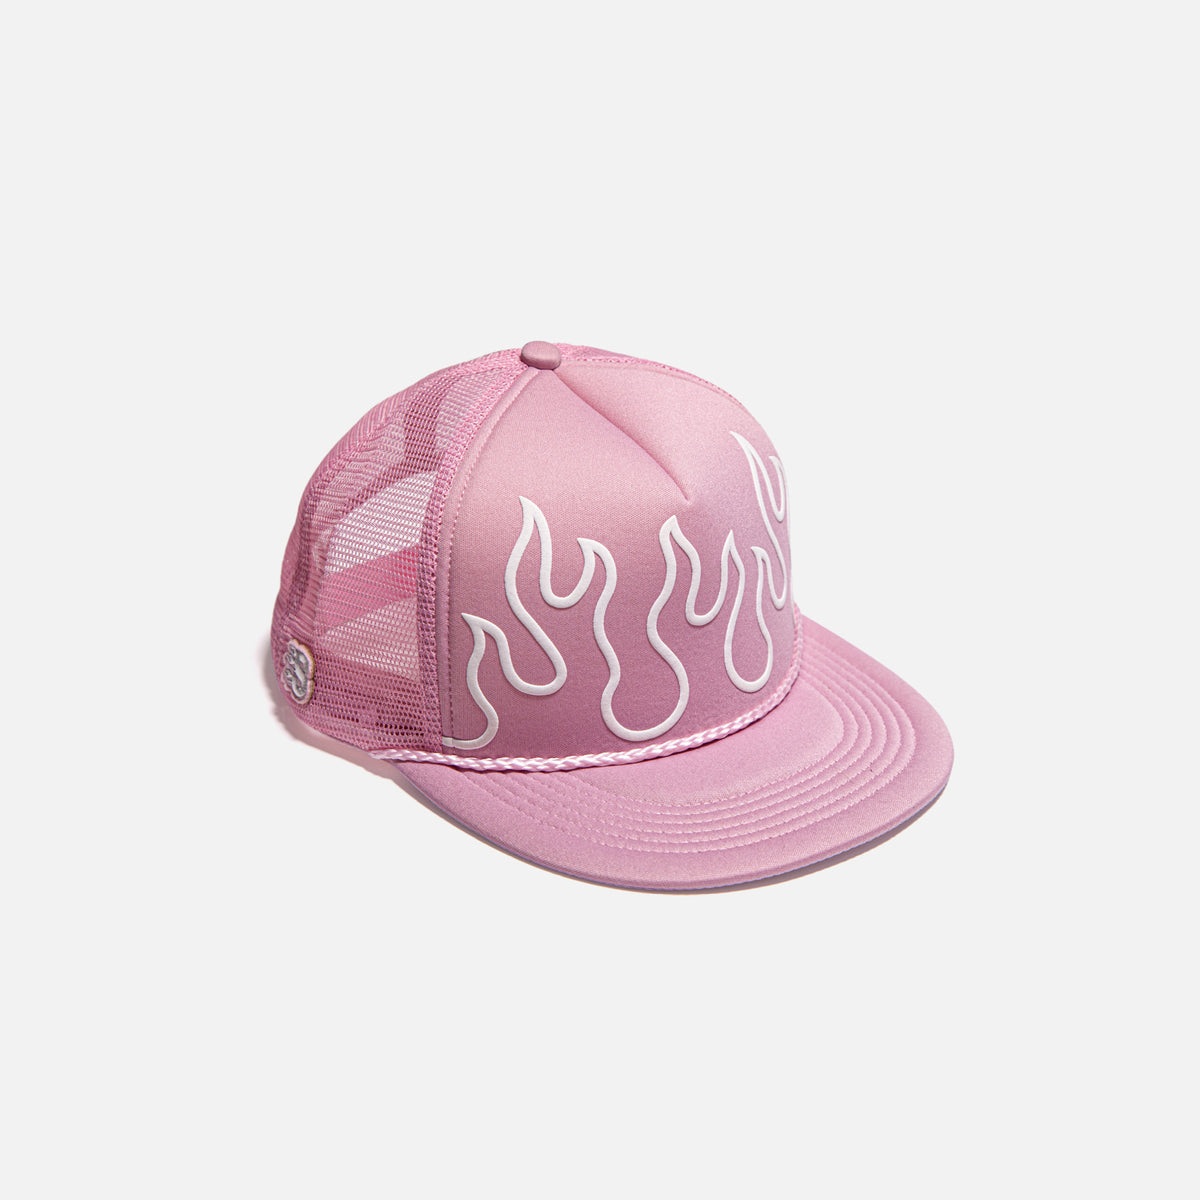 FUEGO CAP - PINK / FRONT VIEW